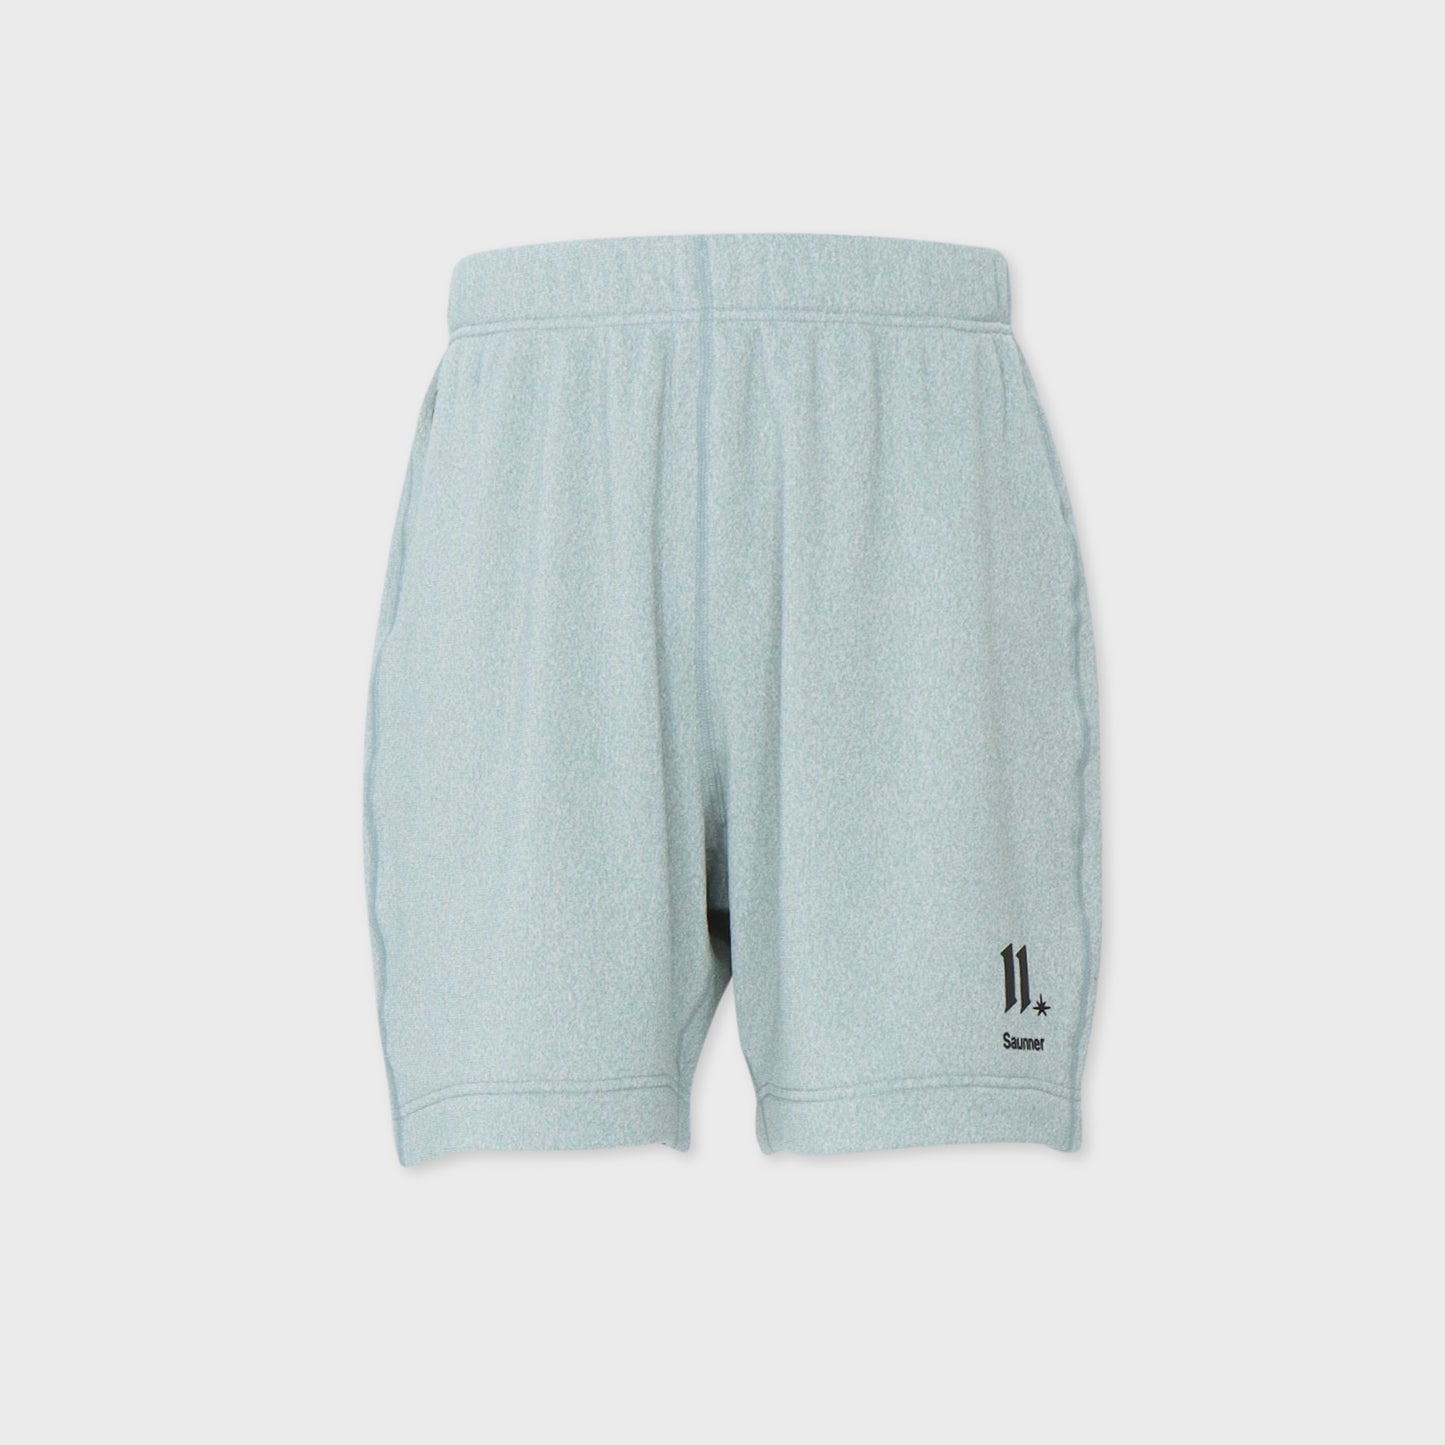 AFTWATER/ PILE SHORTS - Neutral Mix Gray